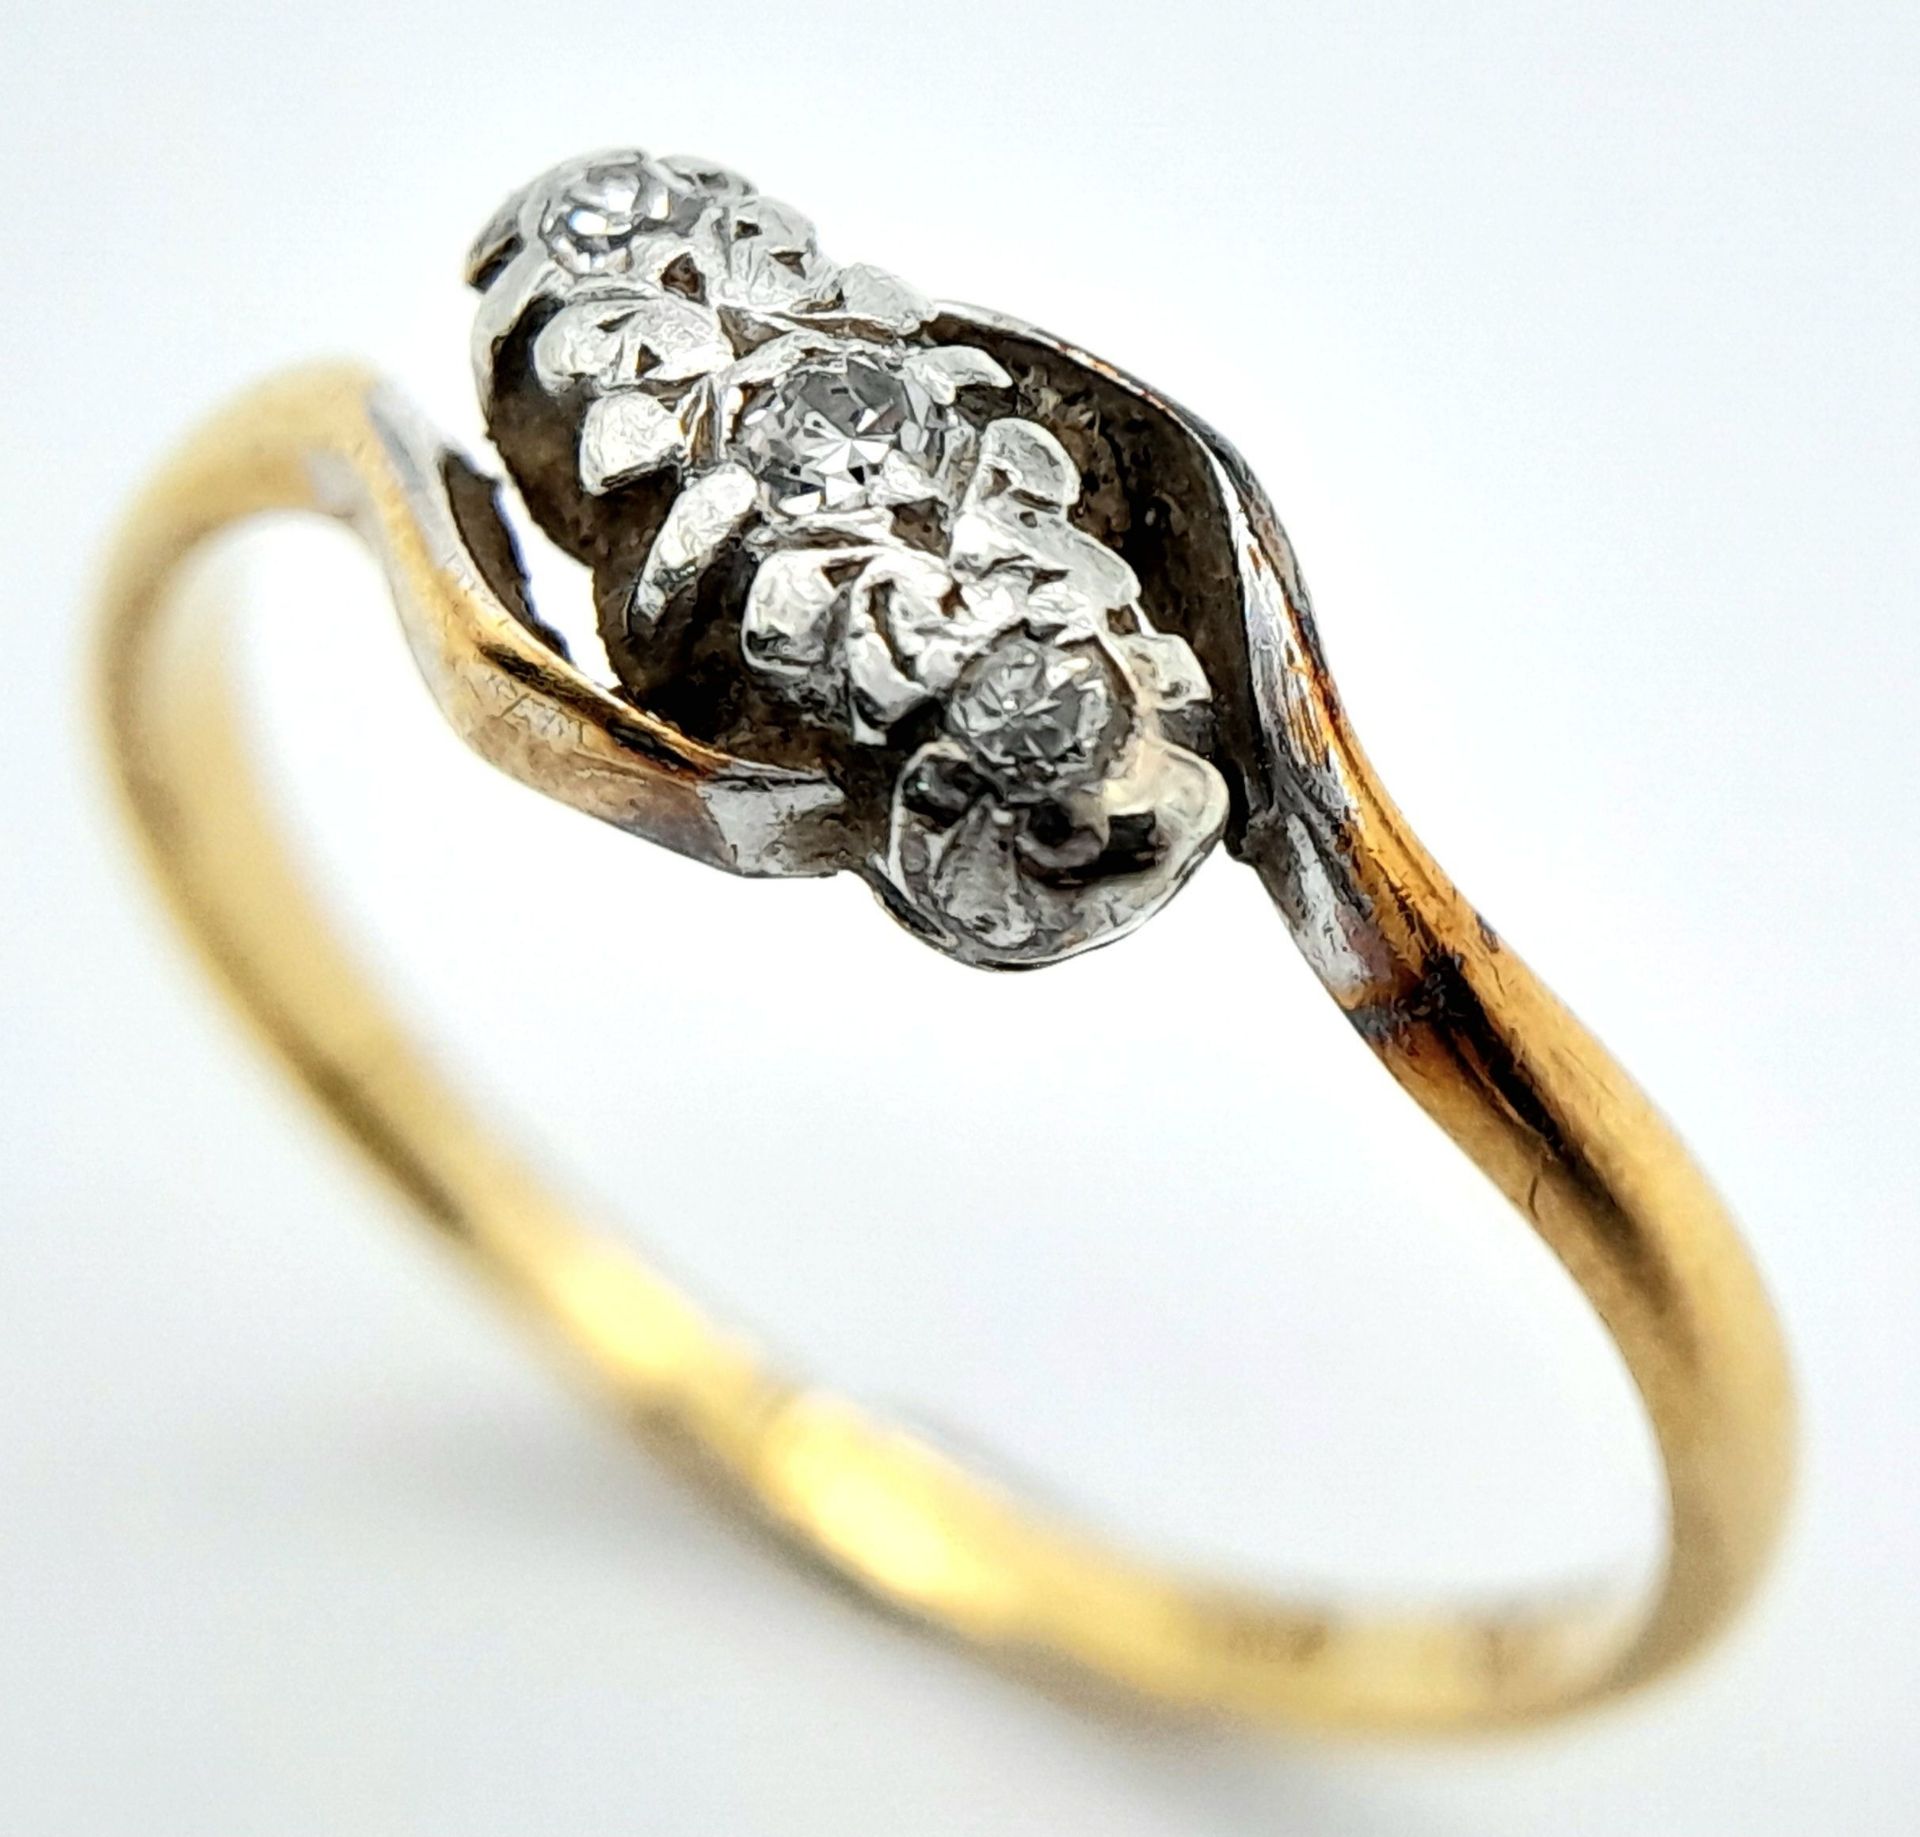 A vintage, 18 K yellow gold ring with a trilogy of round cut diamonds in a twisted design. Ring